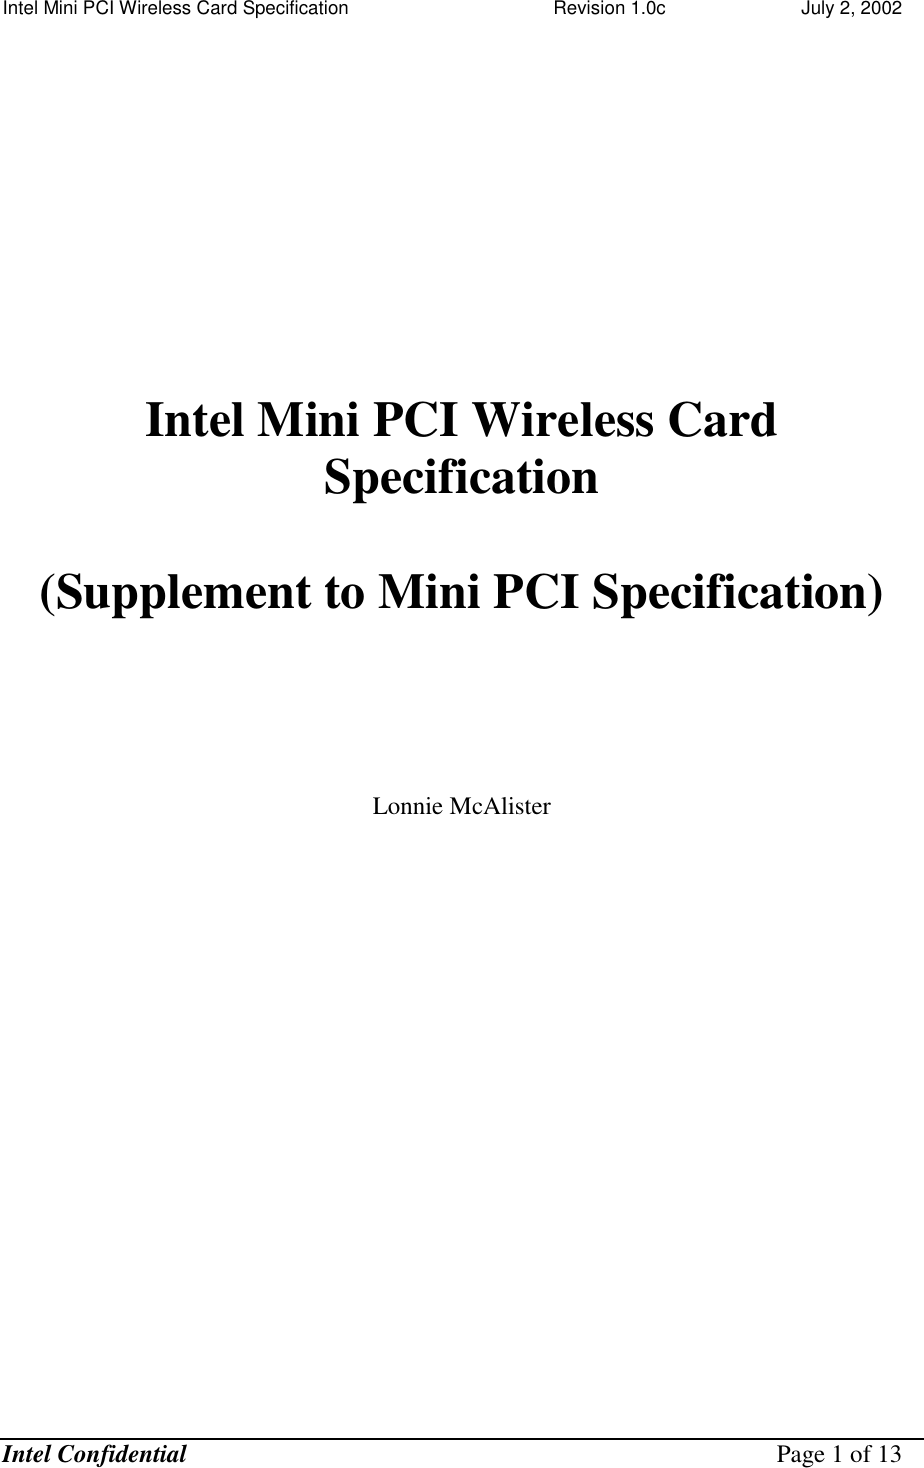 Intel Mini PCI Wireless Card Specification    Revision 1.0c                          July 2, 2002  Intel Confidential    Page 1 of 13       Intel Mini PCI Wireless Card Specification   (Supplement to Mini PCI Specification)      Lonnie McAlister 